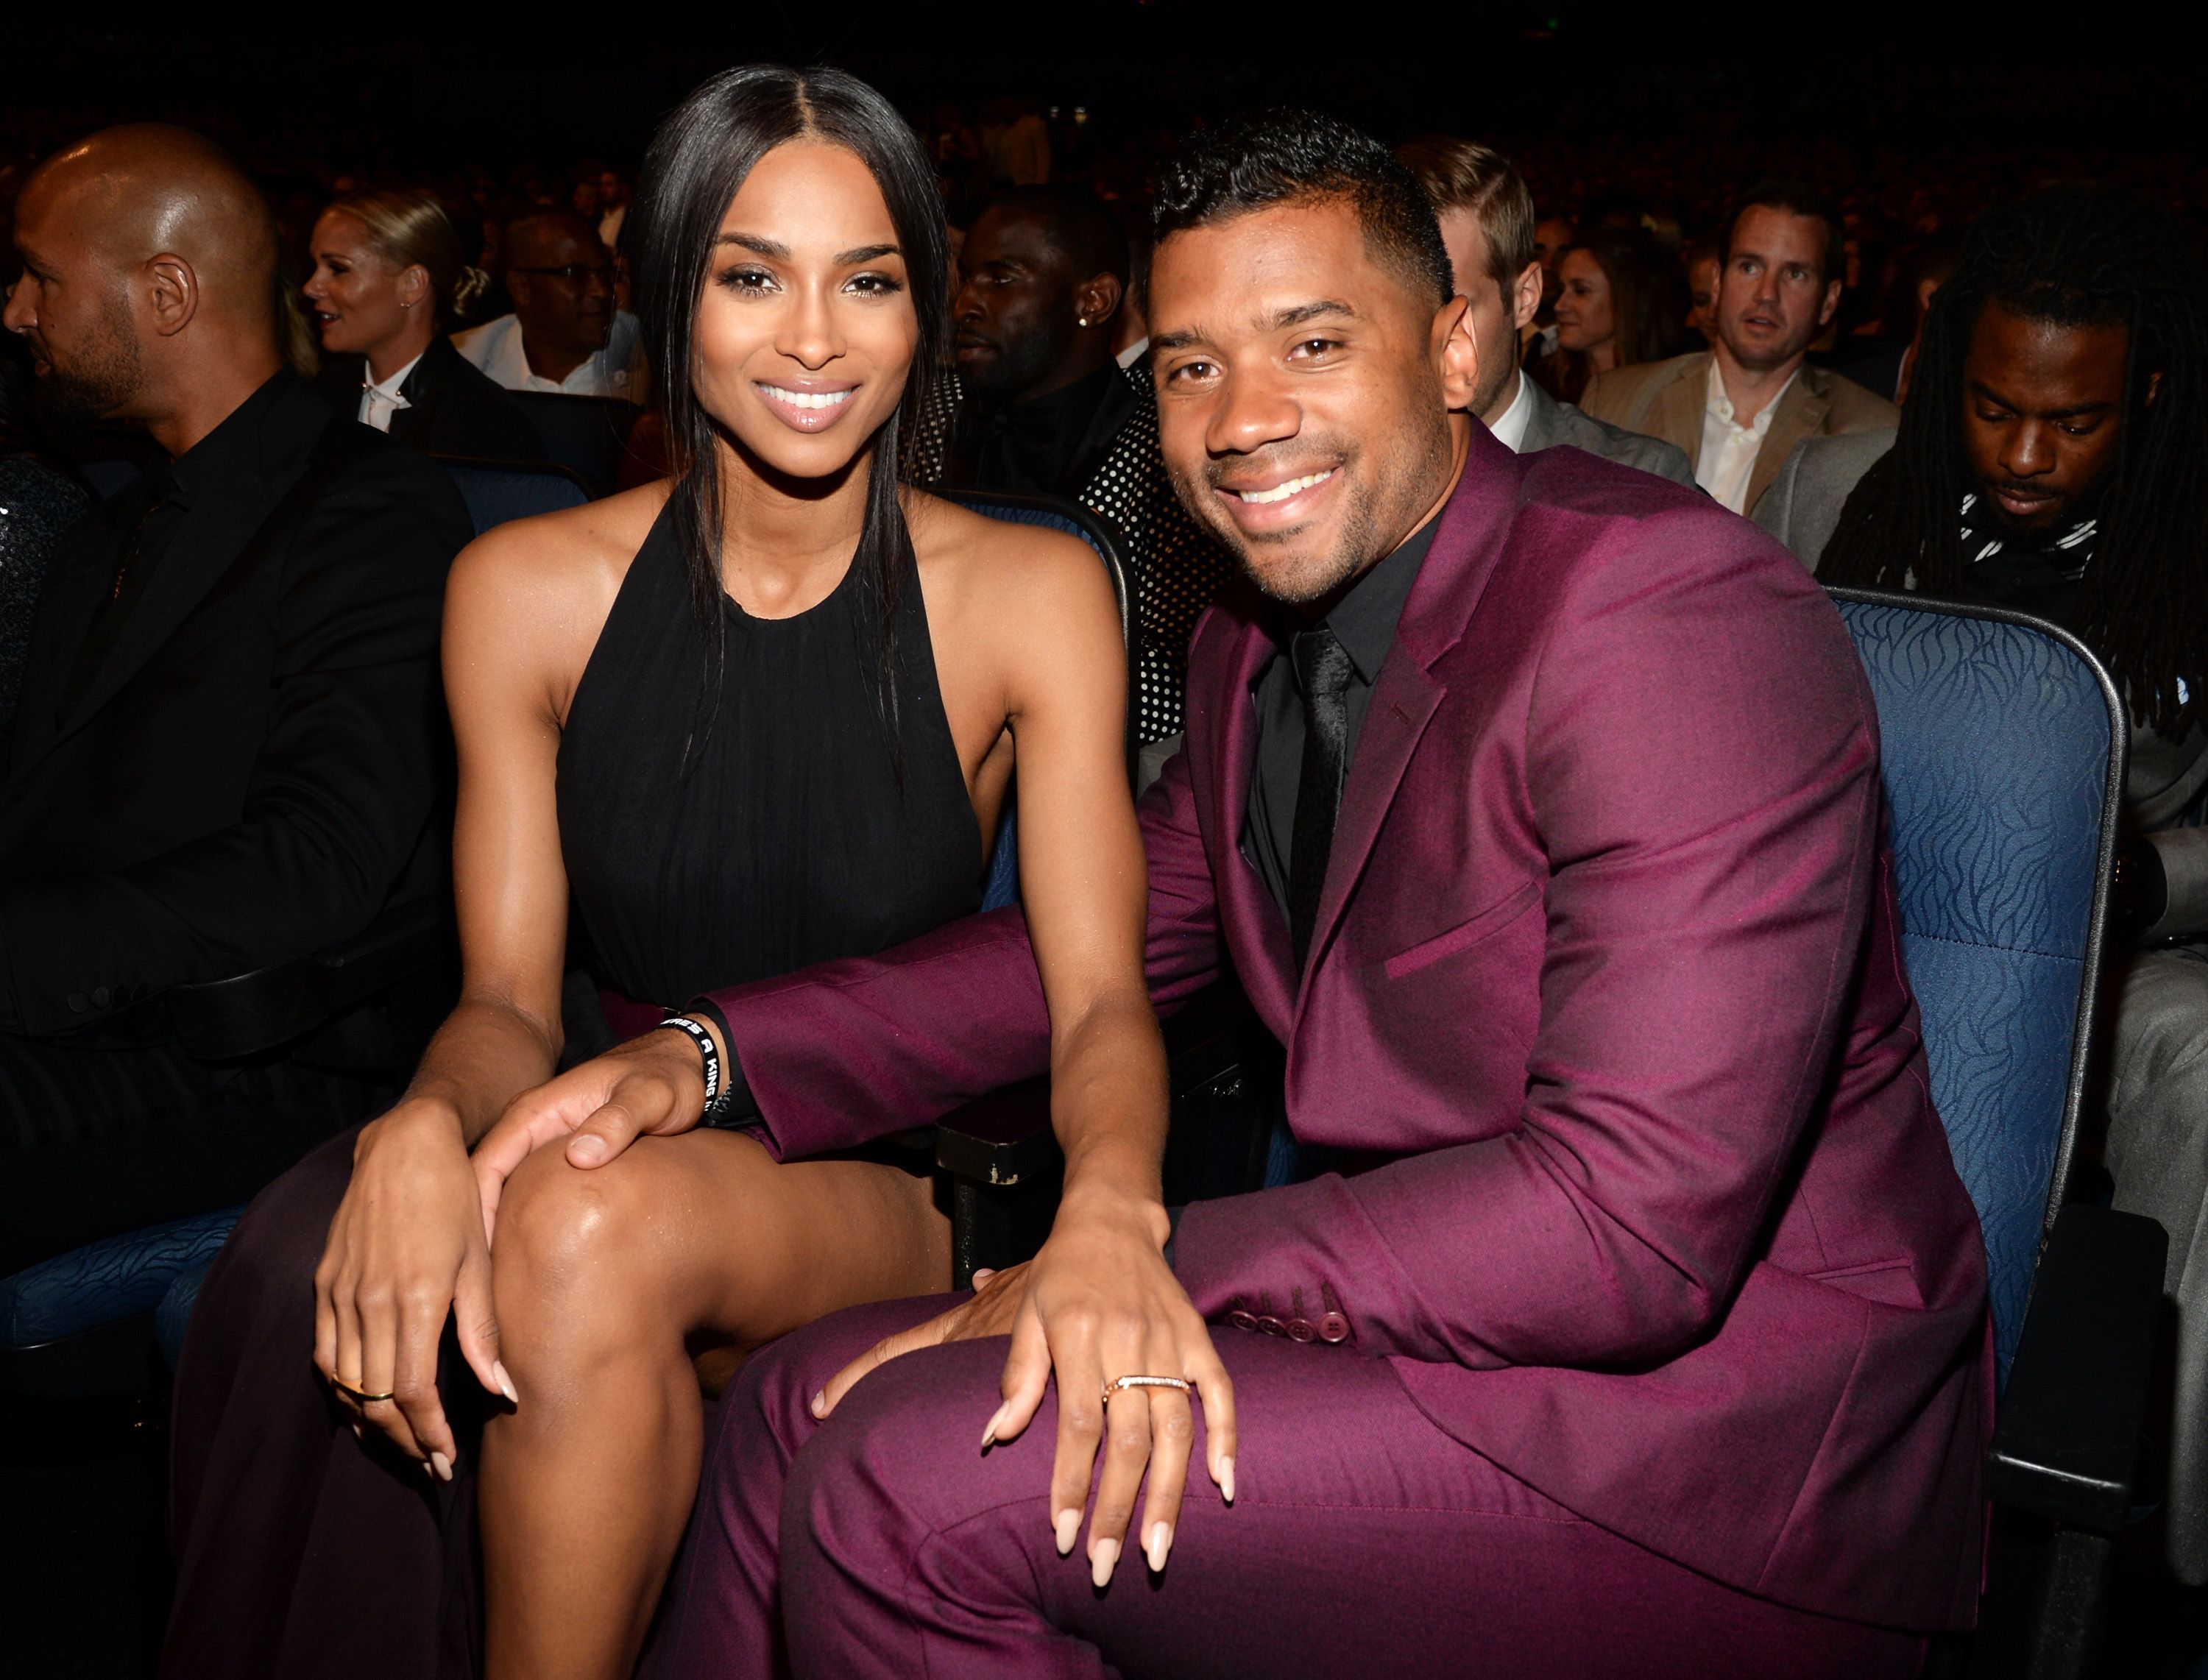  Quarterback Russell Wilson and singer Ciara attend the 2015 ESPYS at Microsoft Theater in LA, California on July 15, 2015. | Photo: Getty Images